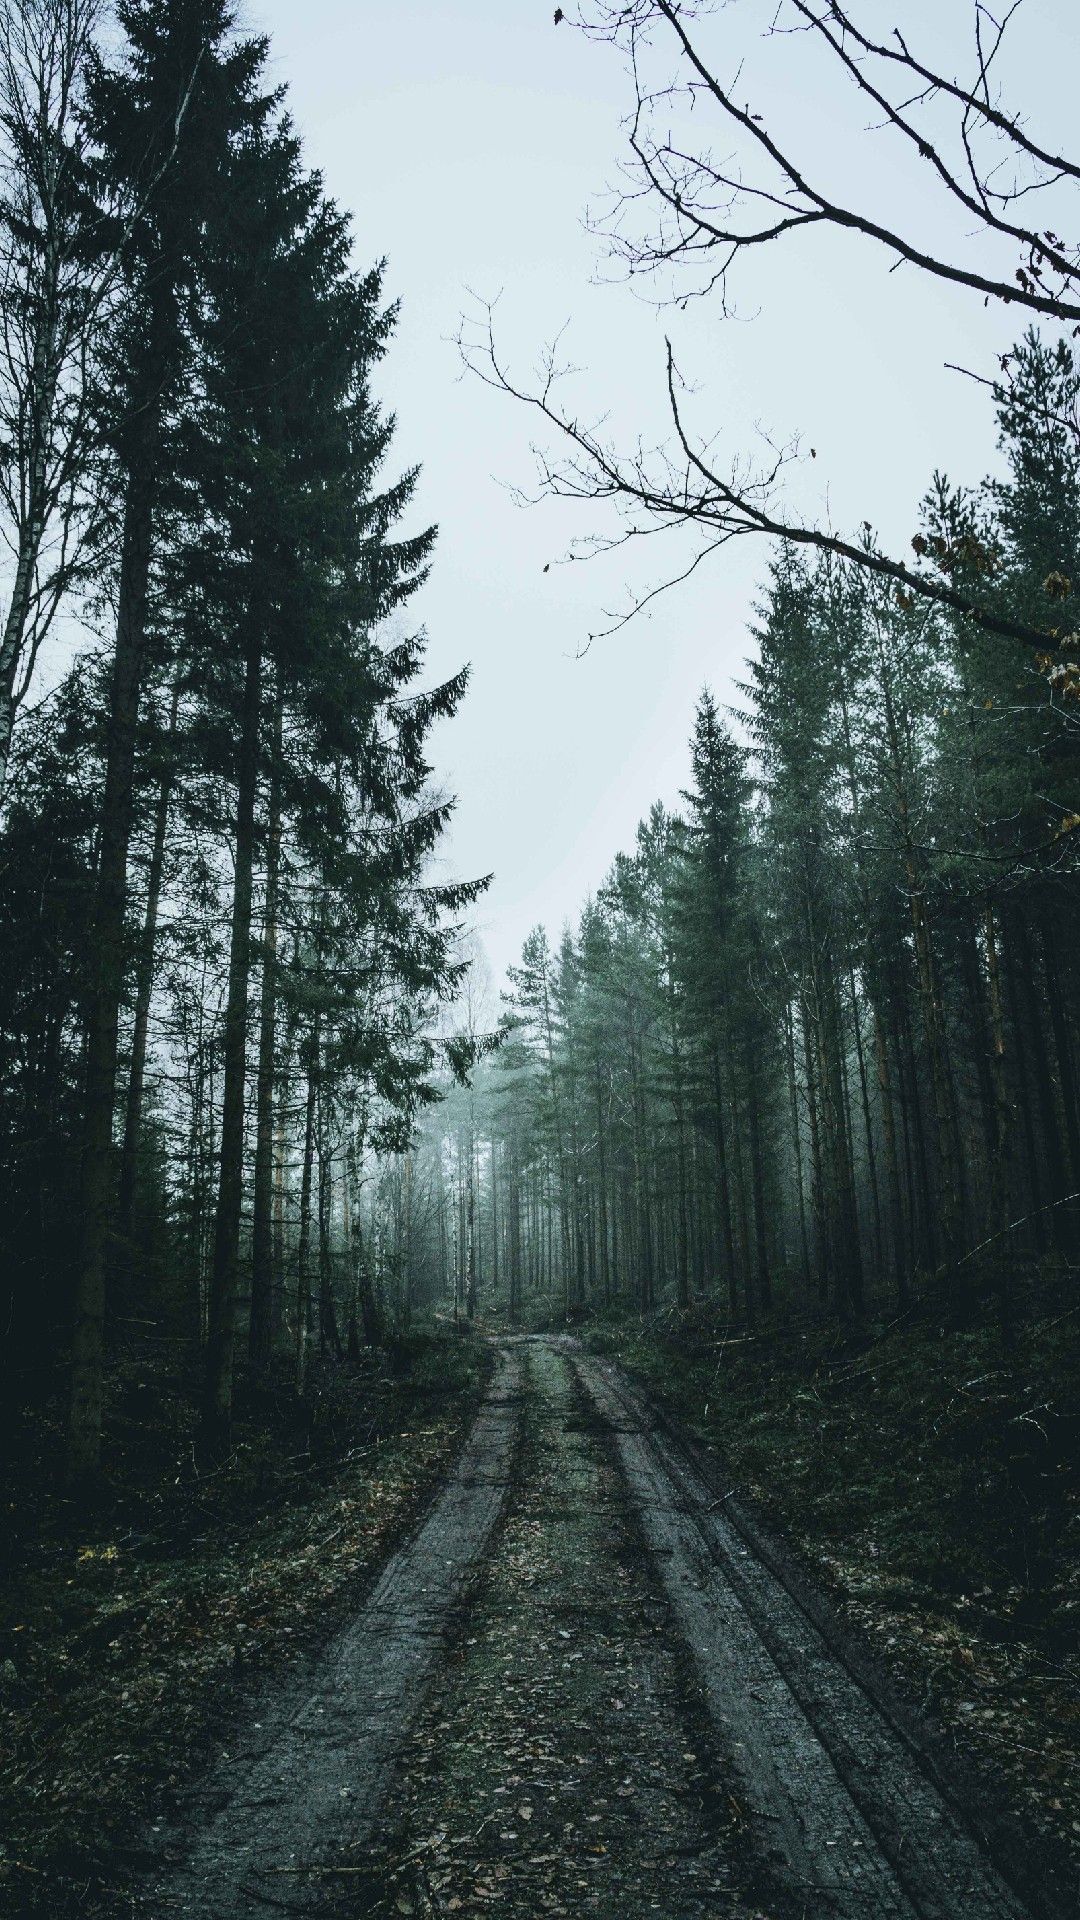 A dirt road through a forest of tall trees - Woods